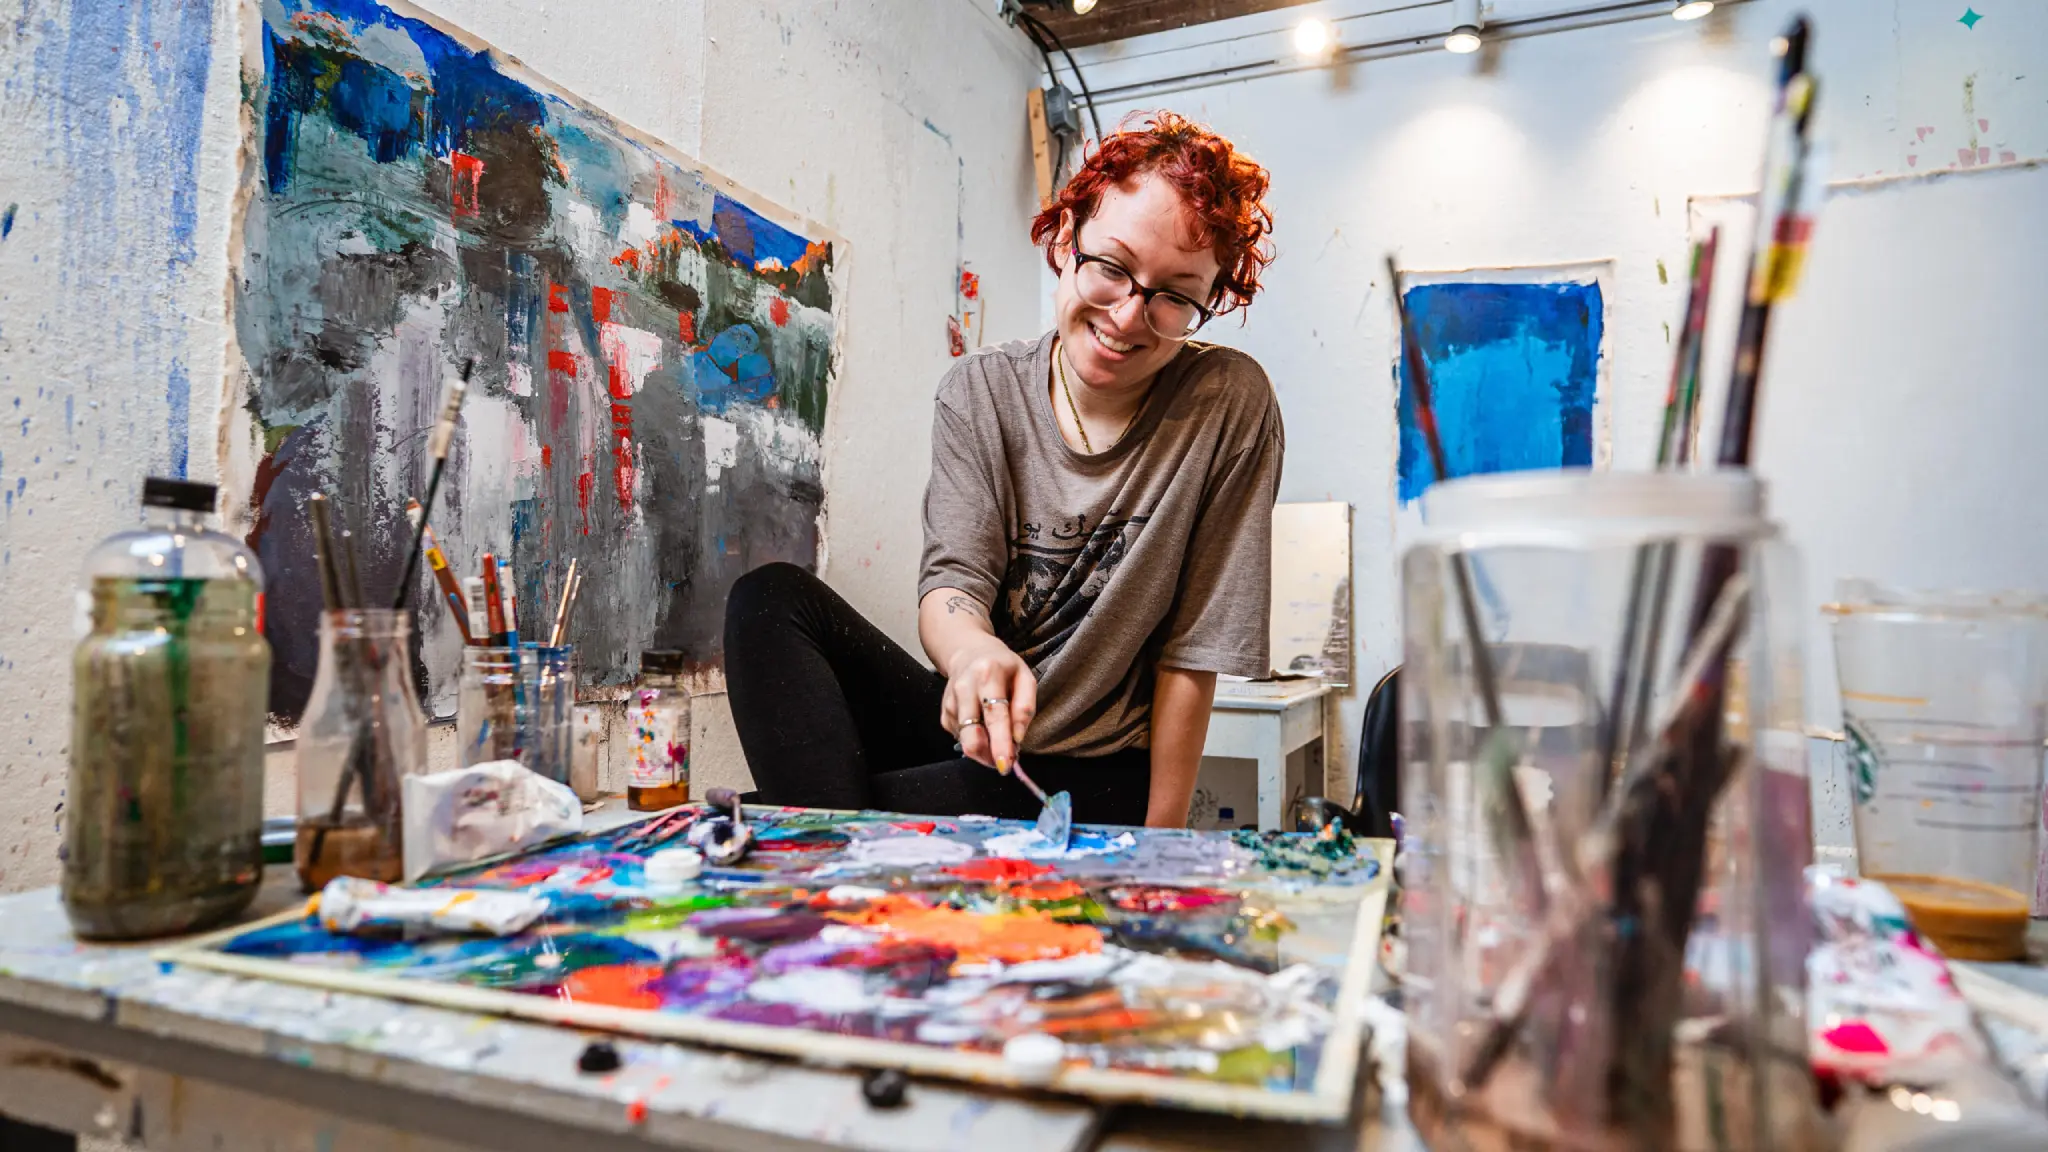 A student works with a colorful art palette.